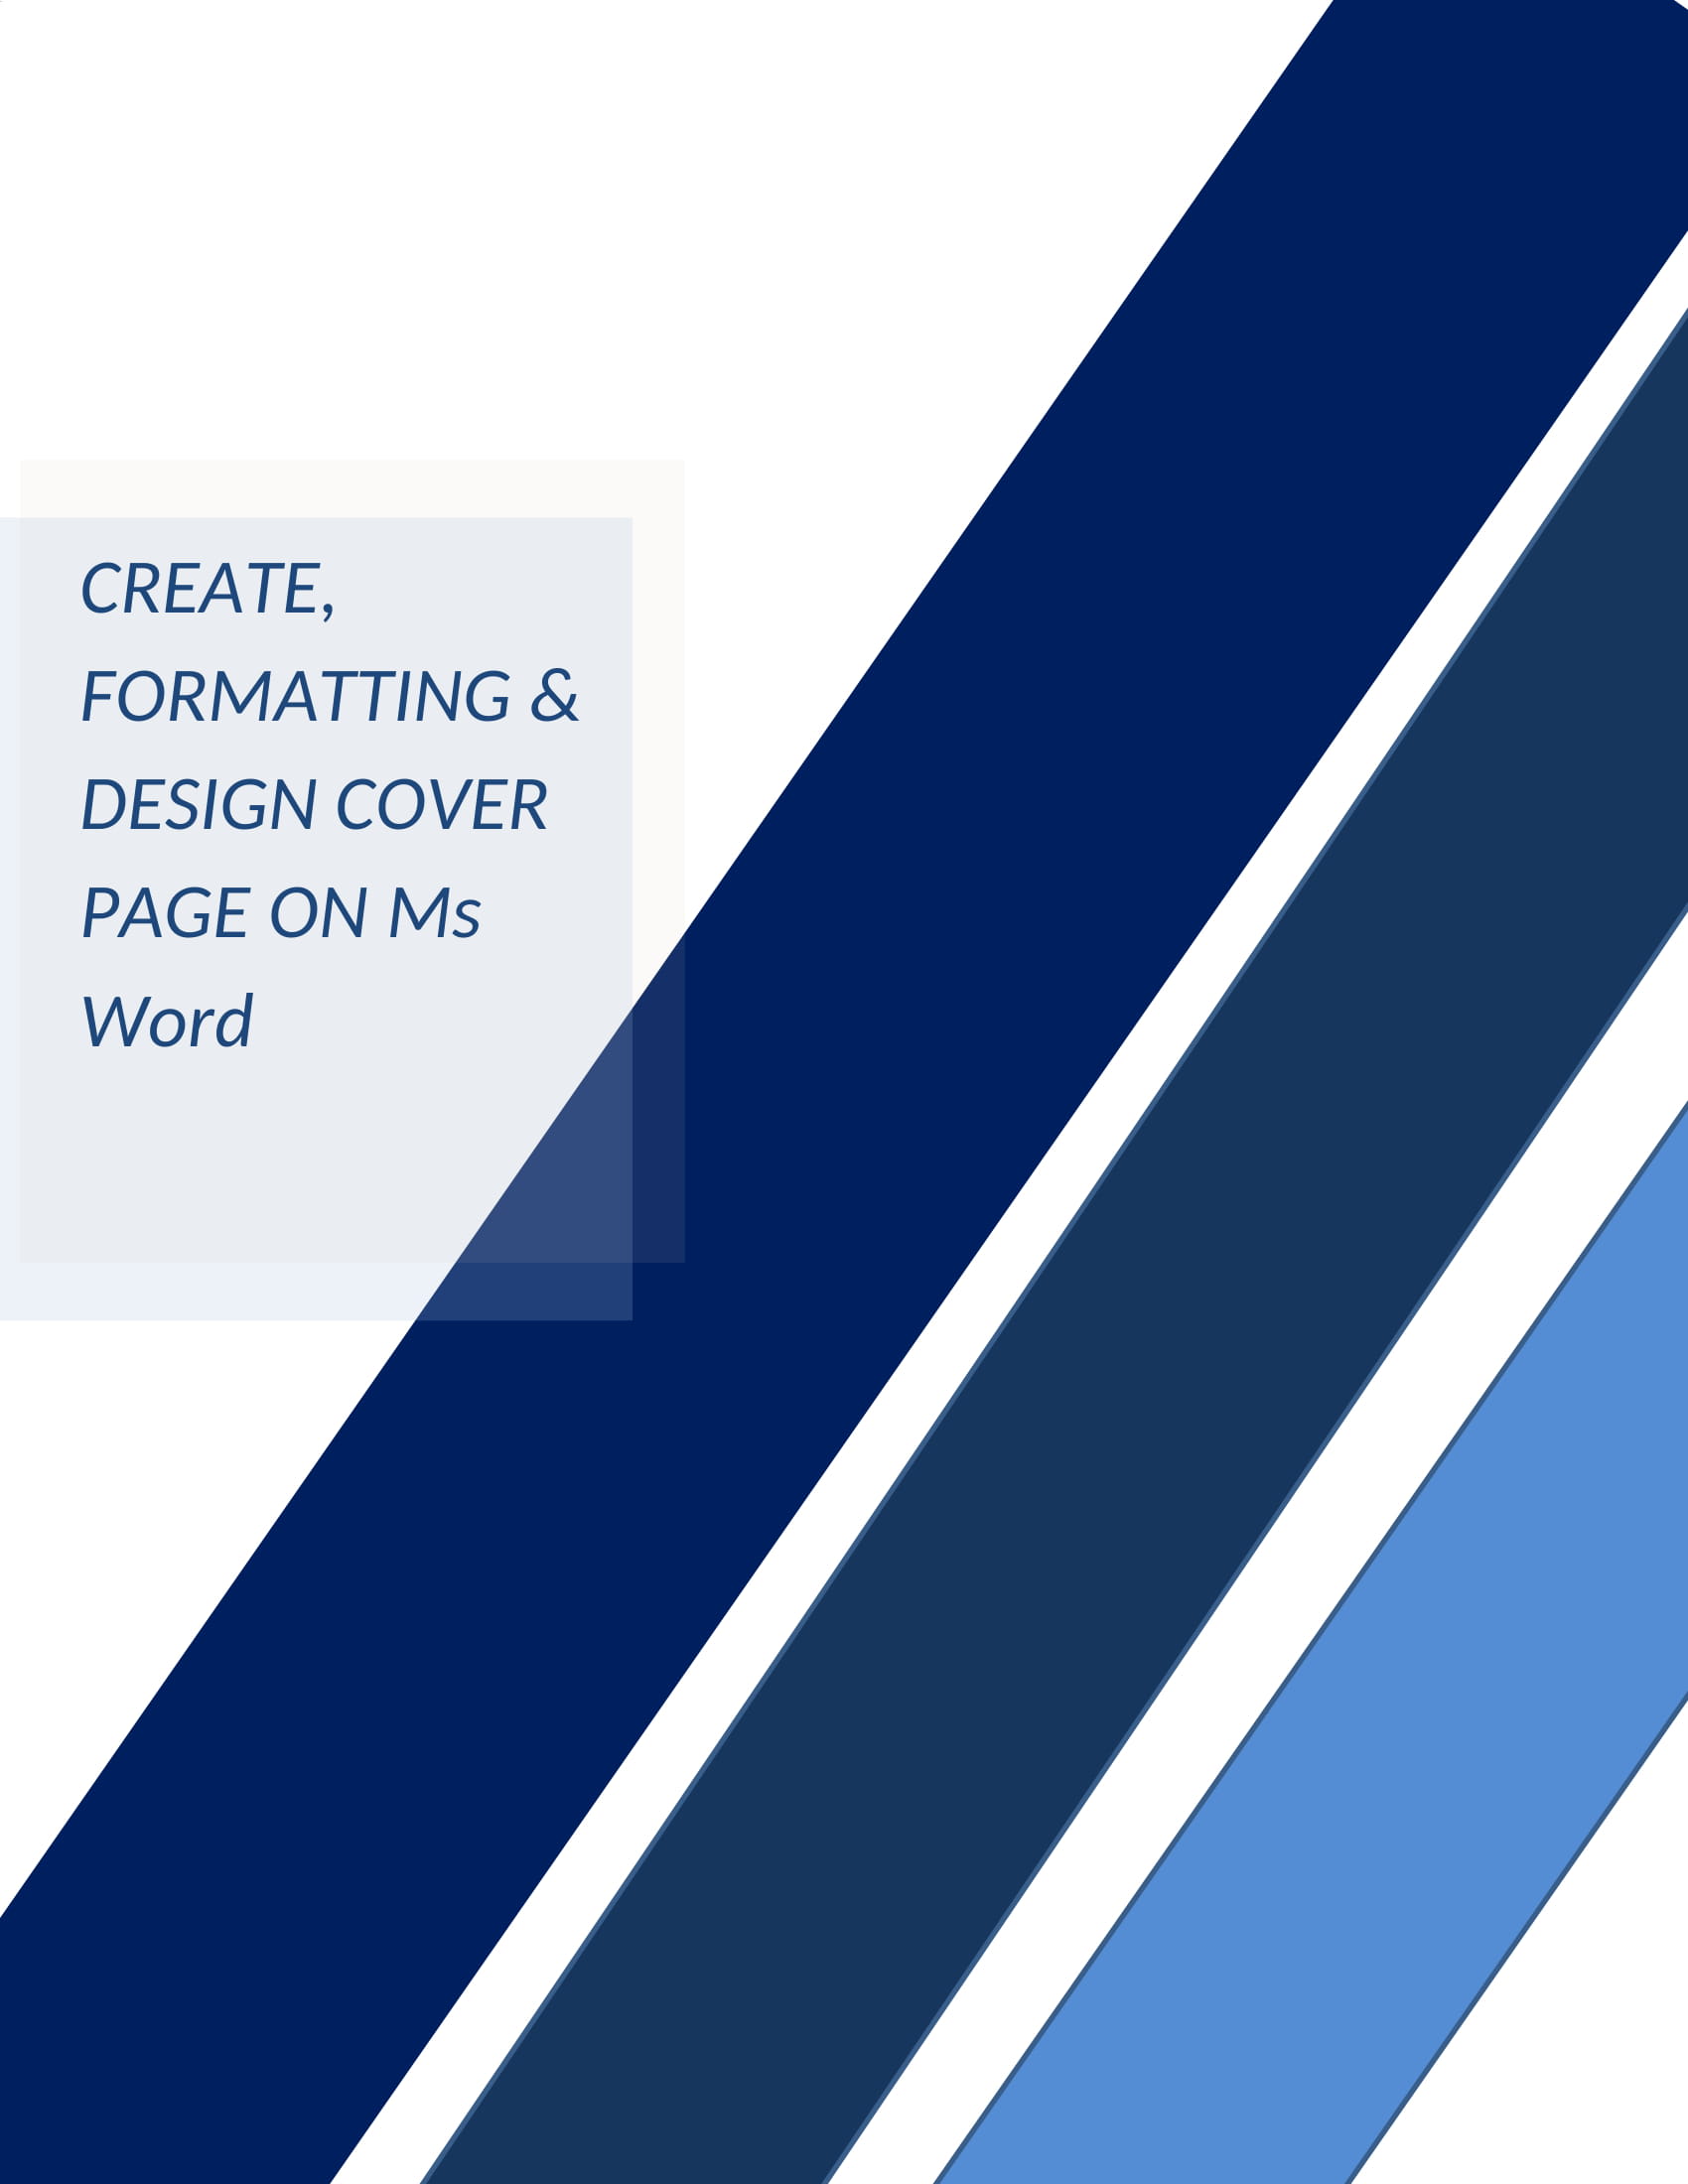 Create And Design Cover Page And Template On Ms Word By Horiyya | Fiverr